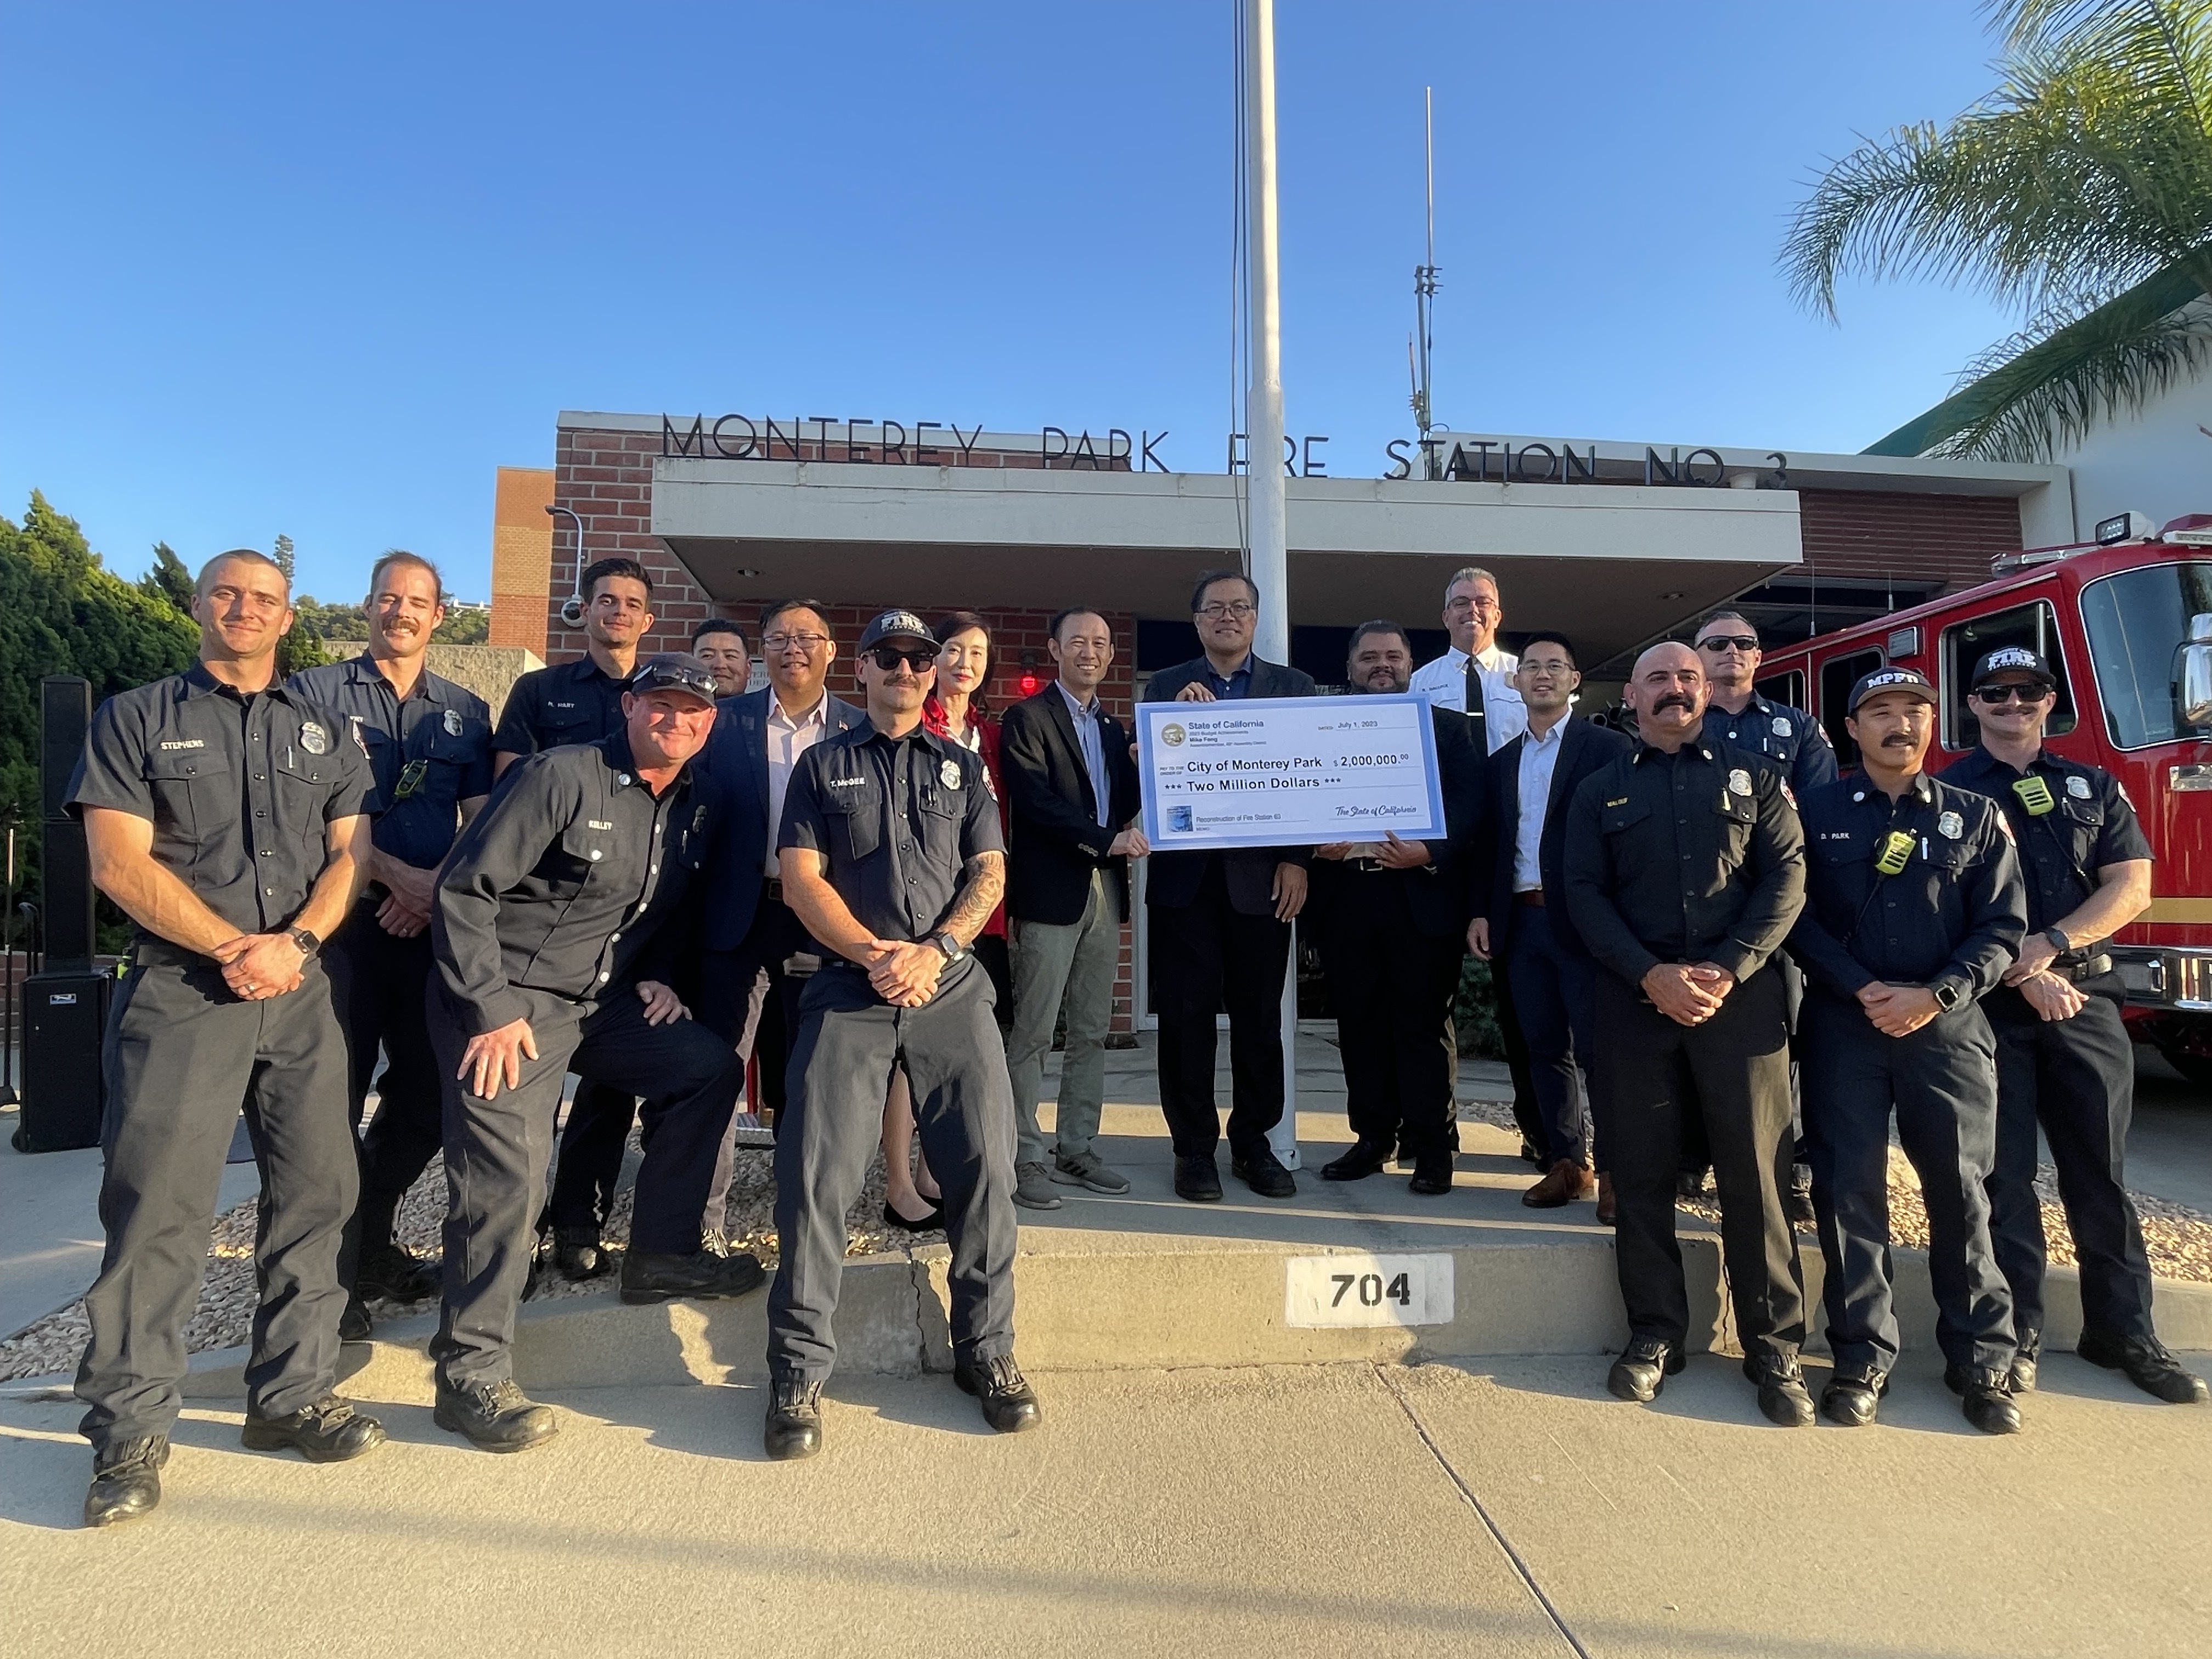 Assemblymember Fong presents a check to the Monterey Park Fire Department